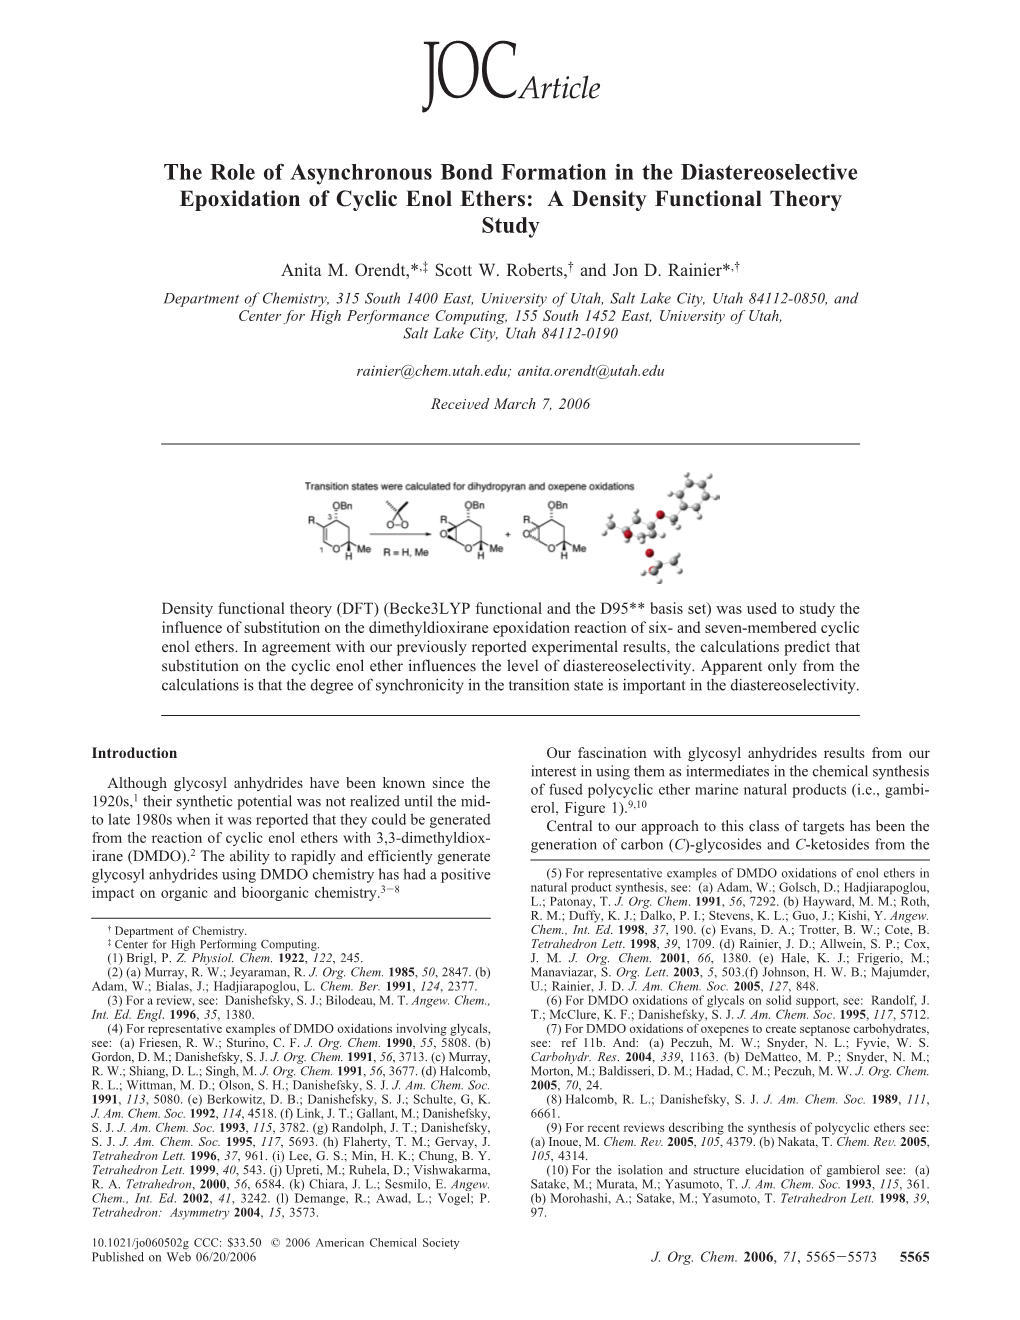 The Role of Asynchronous Bond Formation in the Diastereoselective Epoxidation of Cyclic Enol Ethers: a Density Functional Theory Study